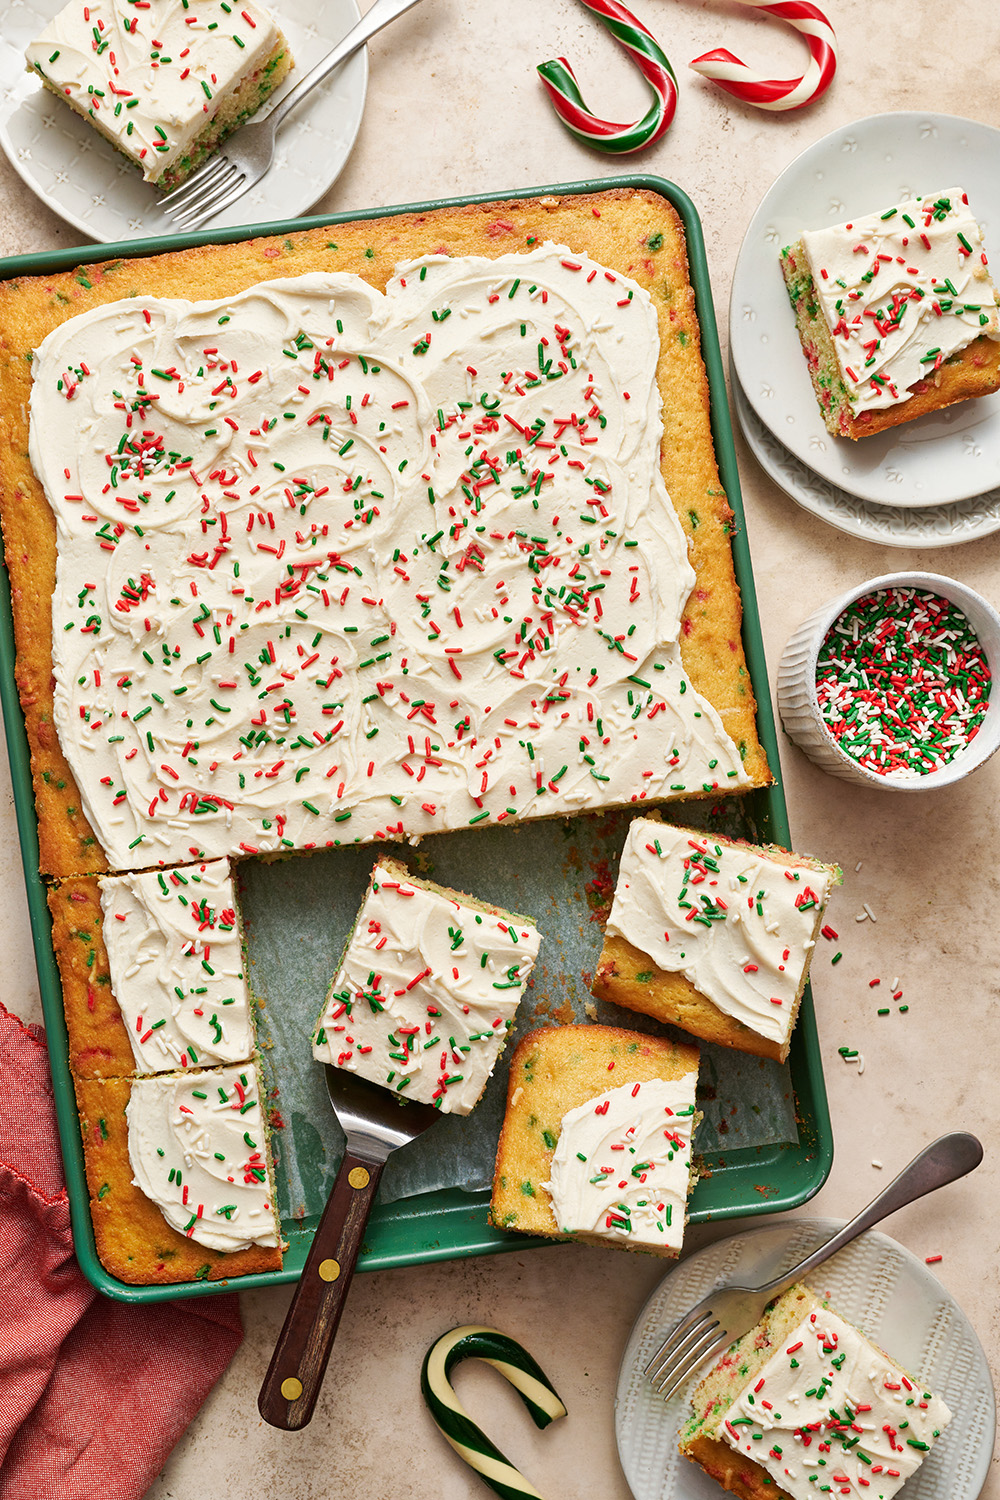 the christmas funfetti sheet cake in its pan, with slices being removed ready to serve.